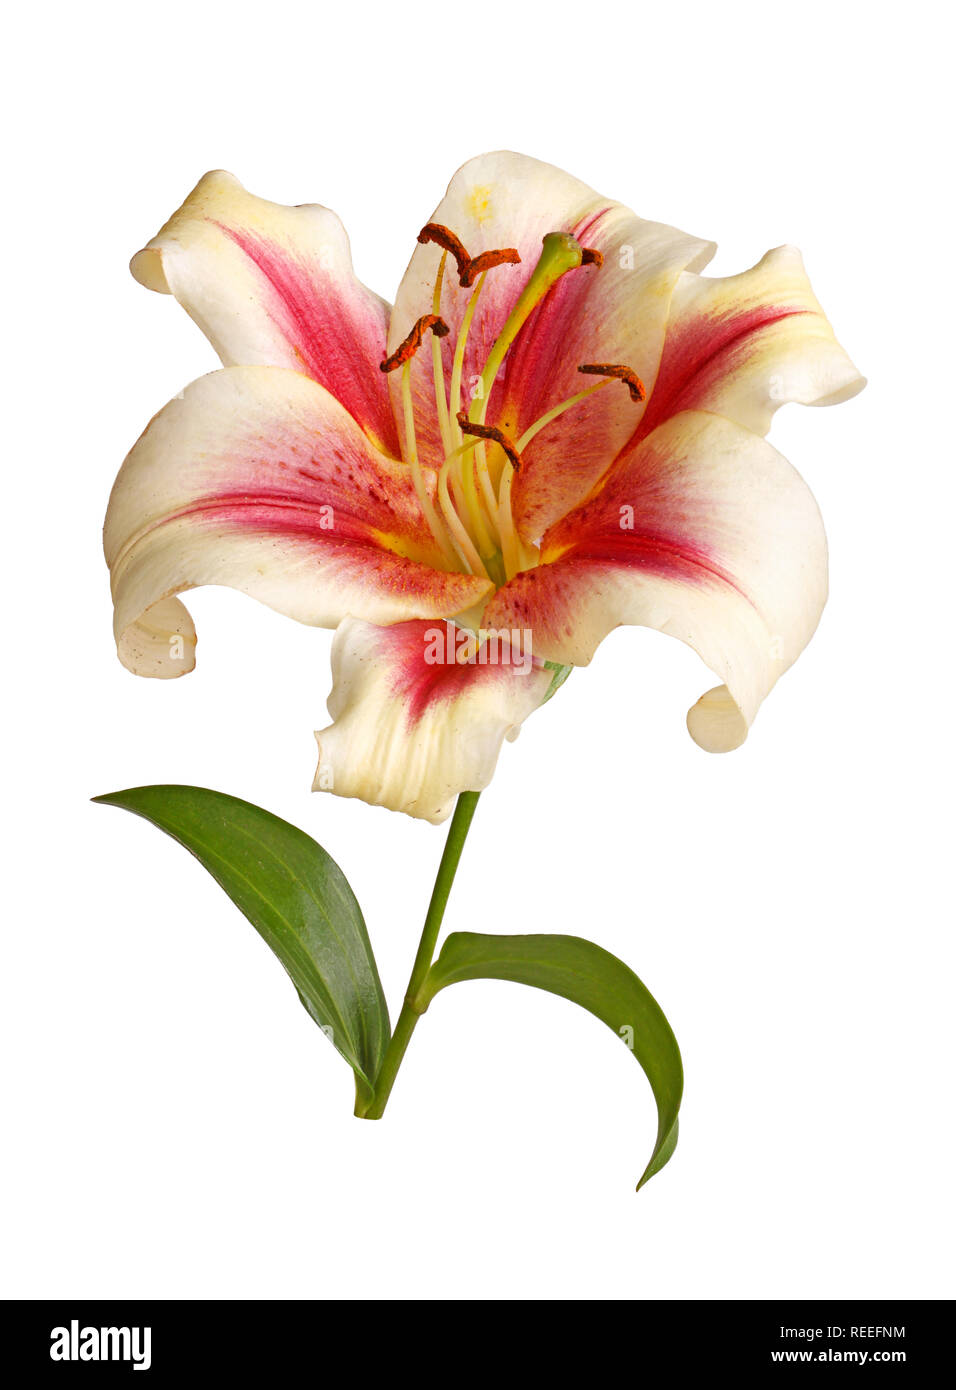 Stem with a single bright red and white flower of an Orienpet lily hybrid isolated against a white background Stock Photo